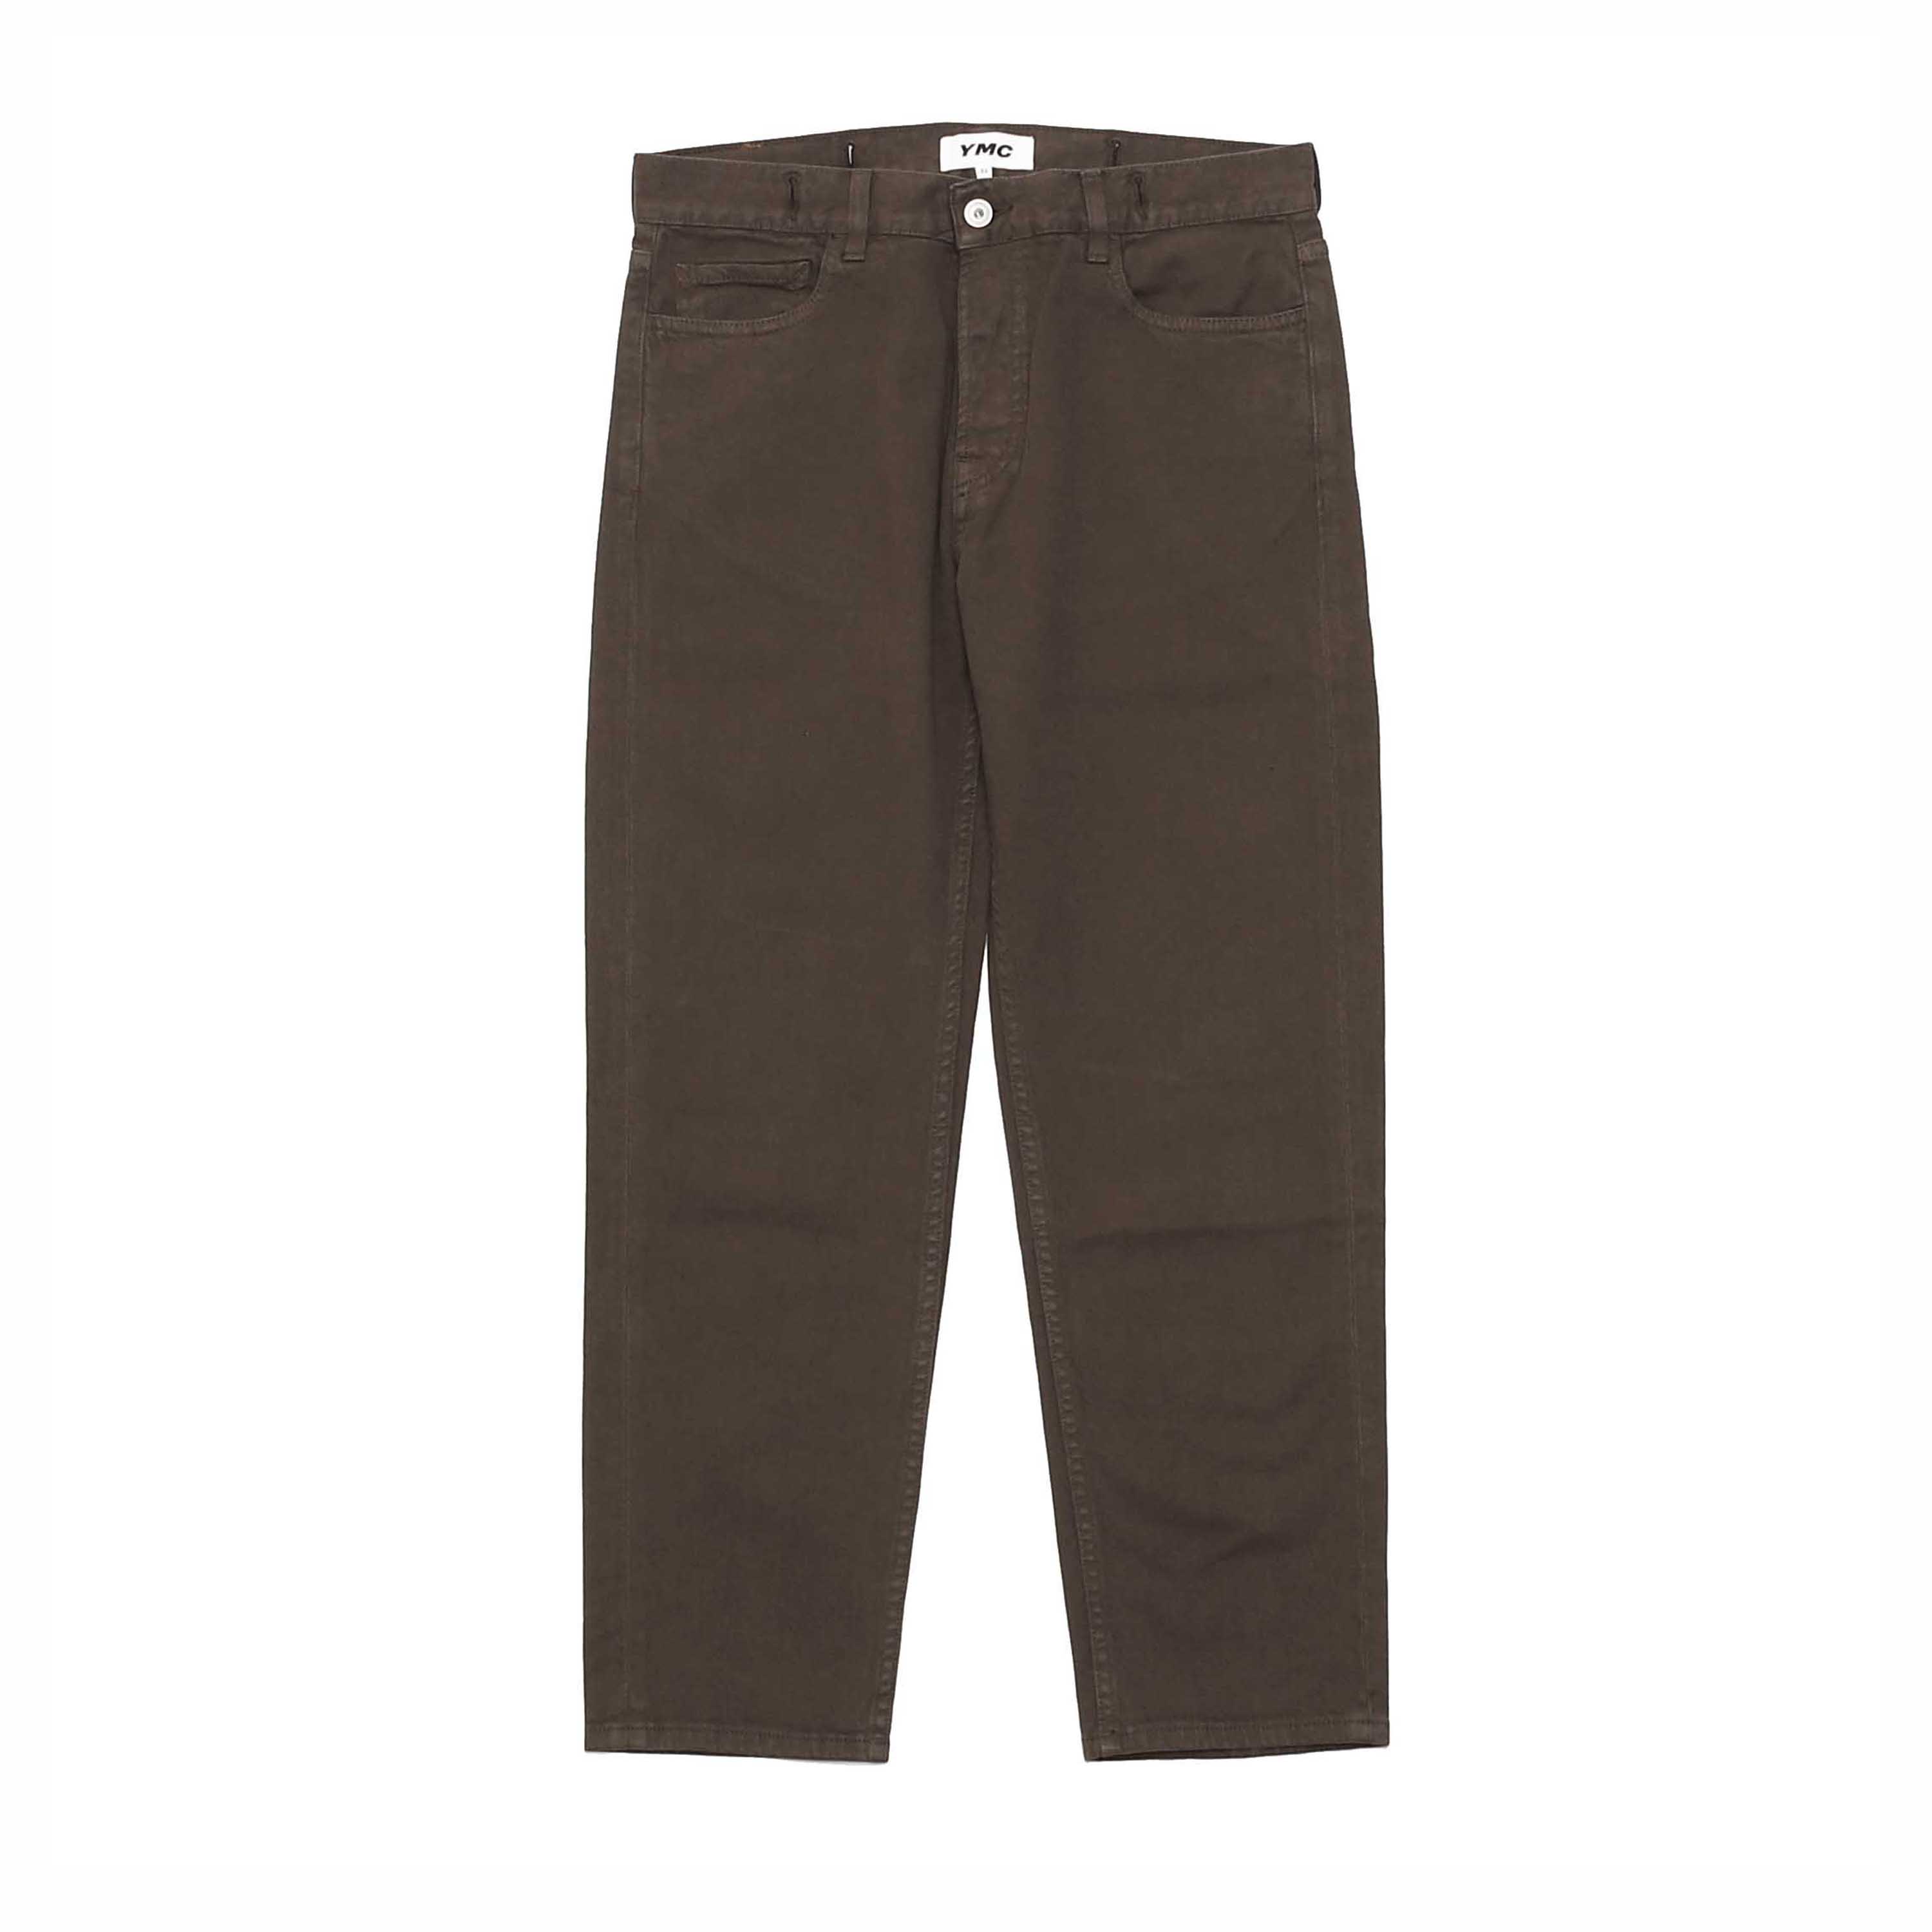 TEARAWAY GARMENT DYED COTTON TWILL JEANS - BROWN